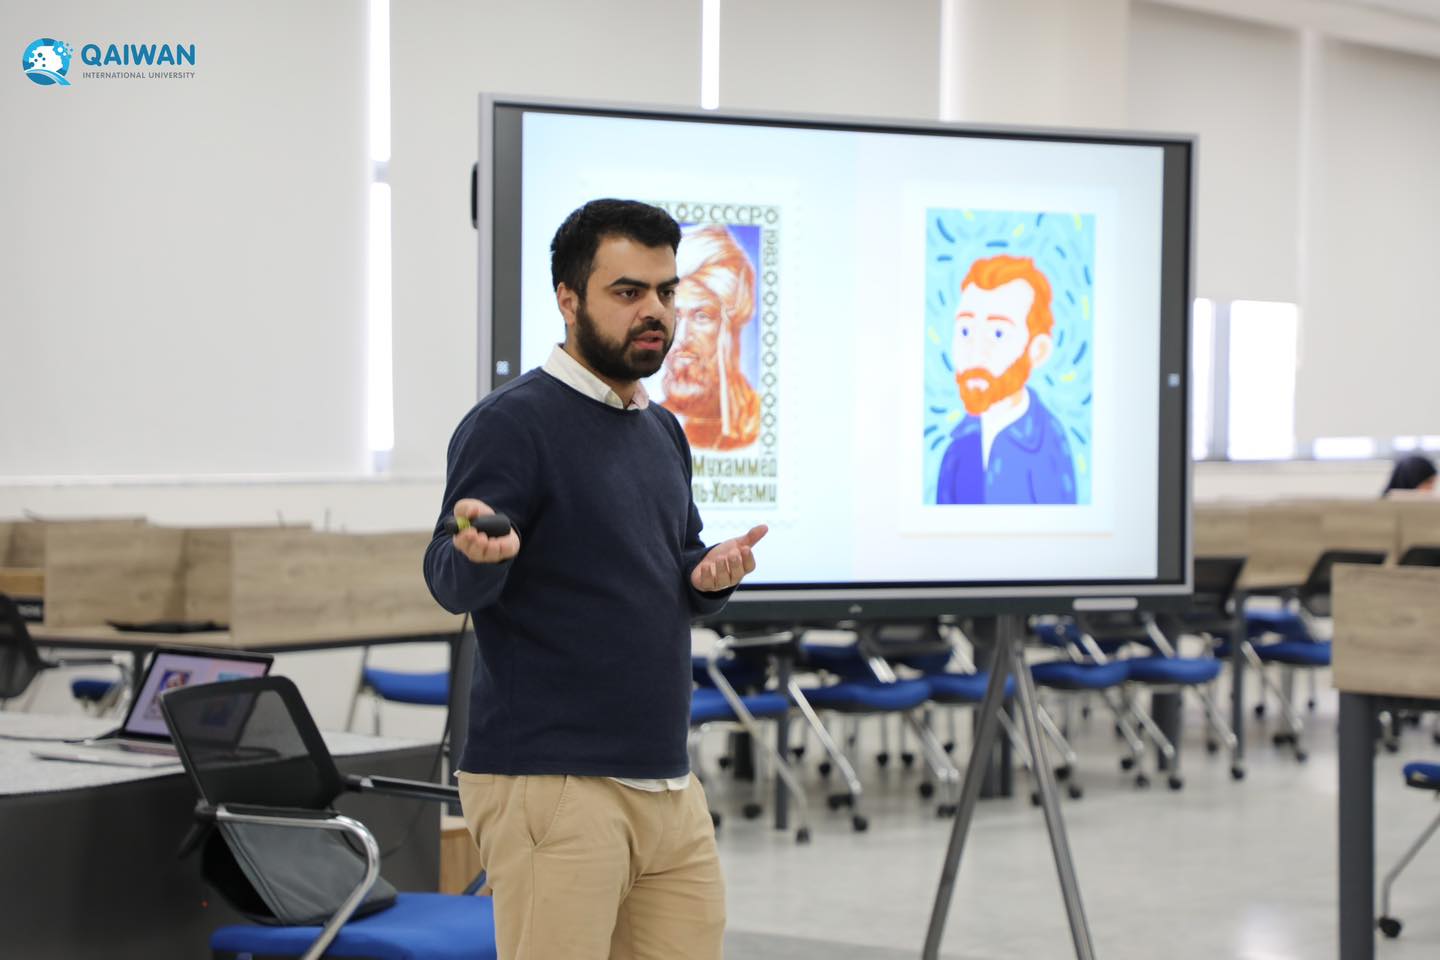 Tech Club organized a seminar as part of the "Graphic Designer" bootcamp featuring Mr. Ahmad Yousef, an expert in the realm of graphic design